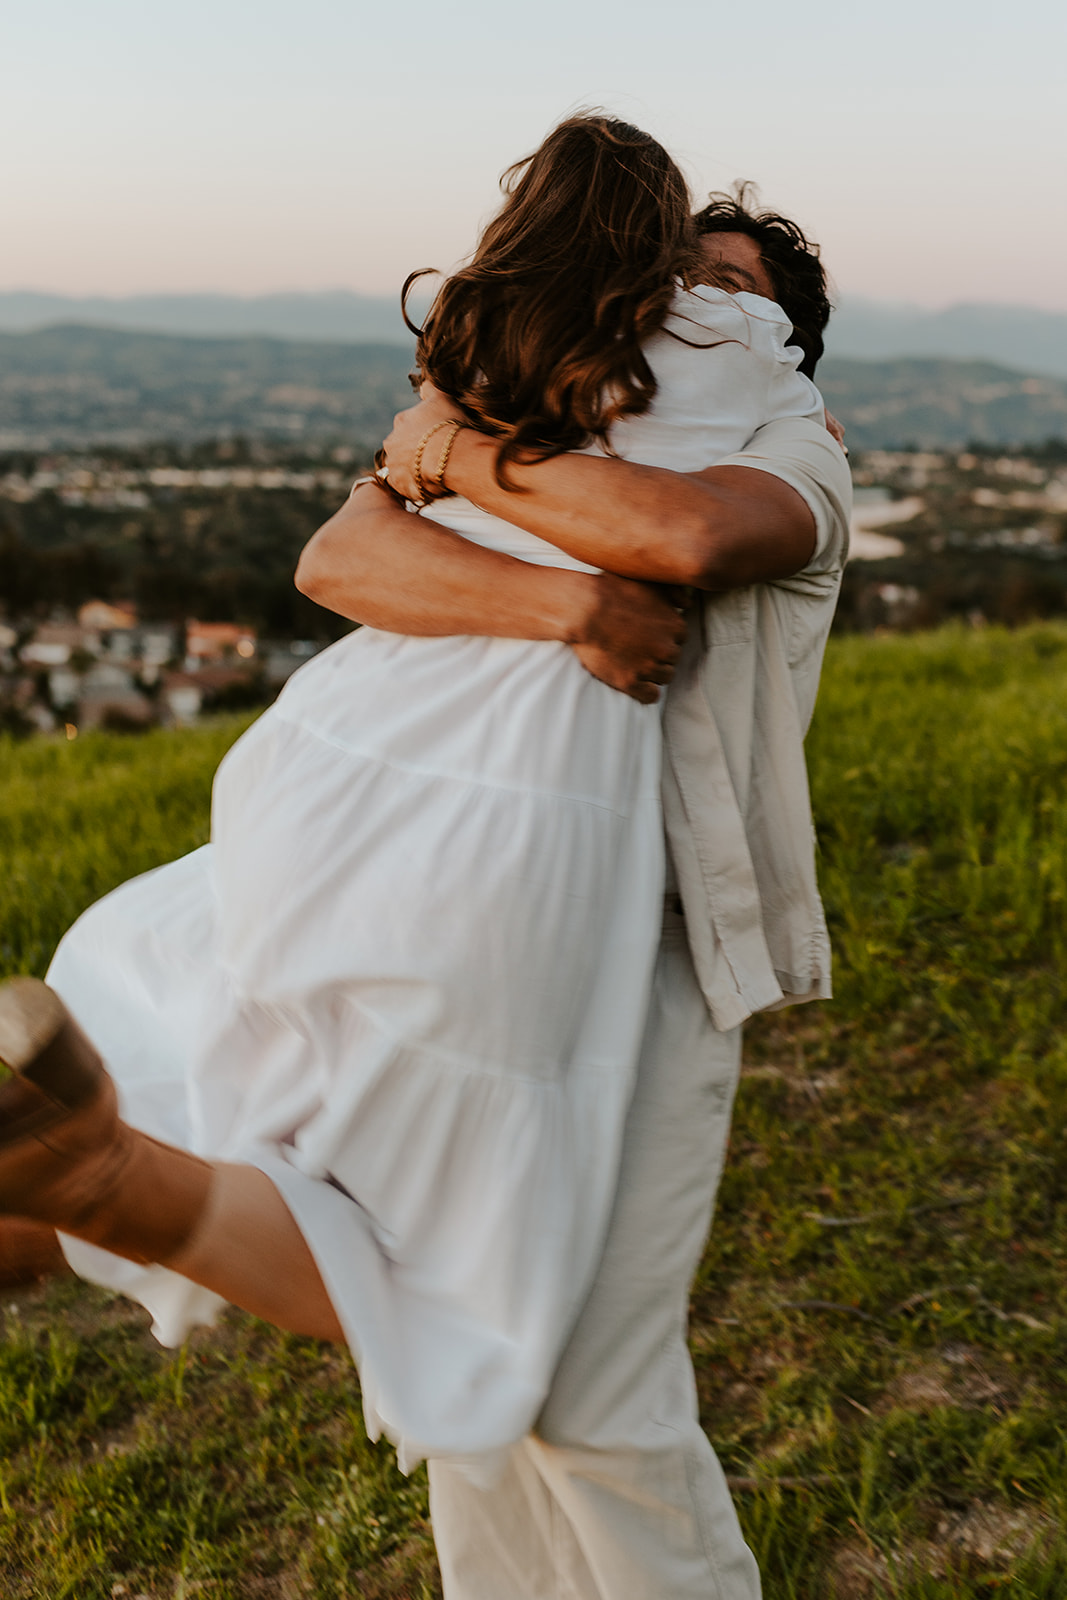 A couple in linen clothes embraces at sunset in the California hills.